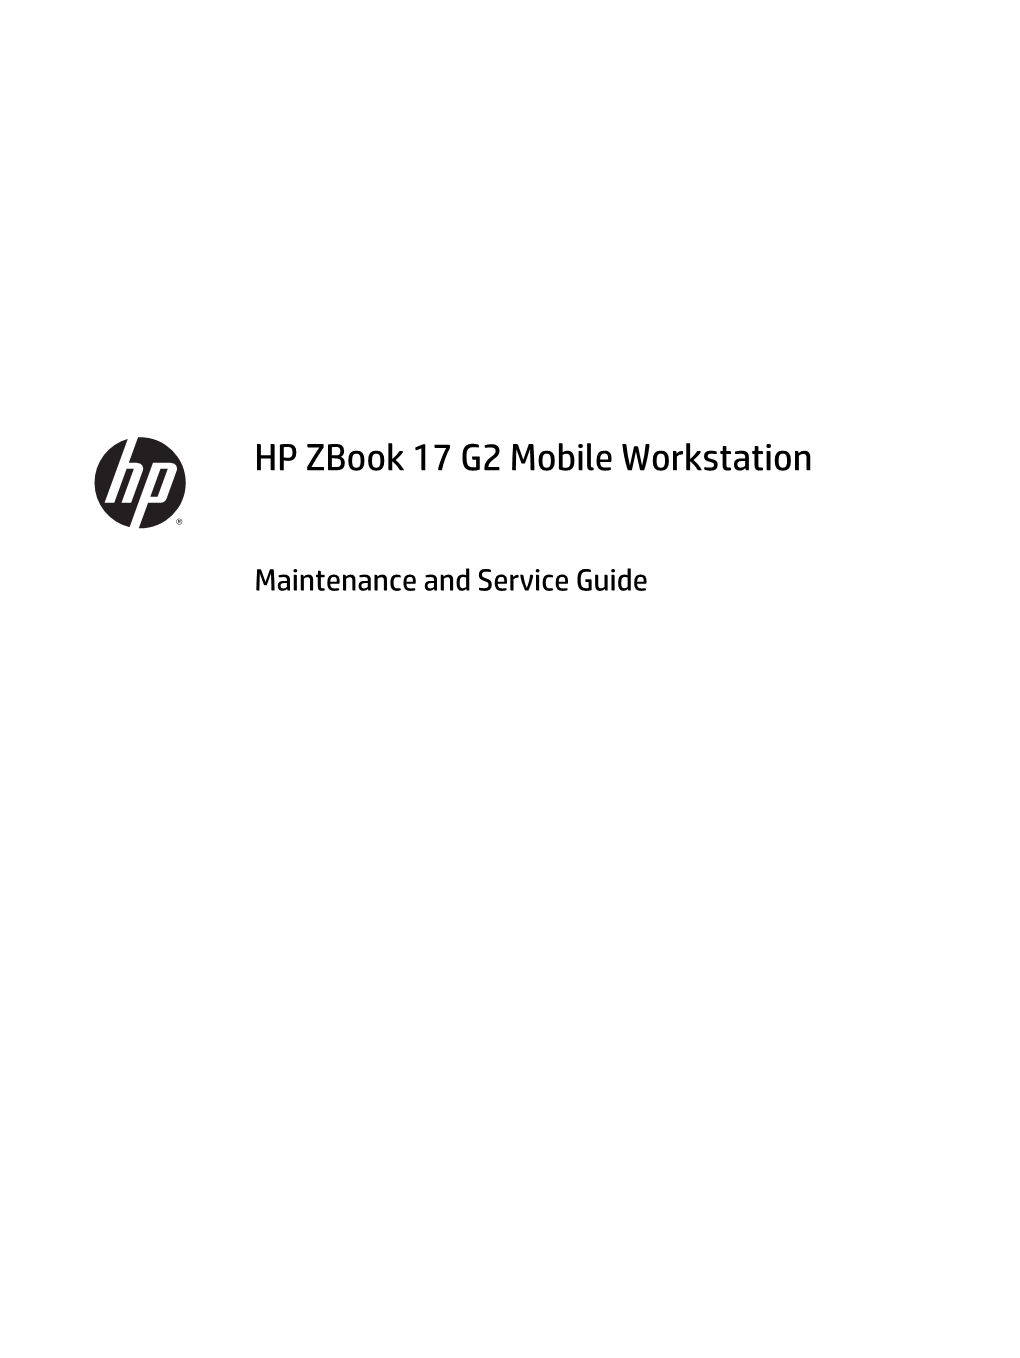 HP Zbook 17 G2 Mobile Workstation Maintenance and Service Guide